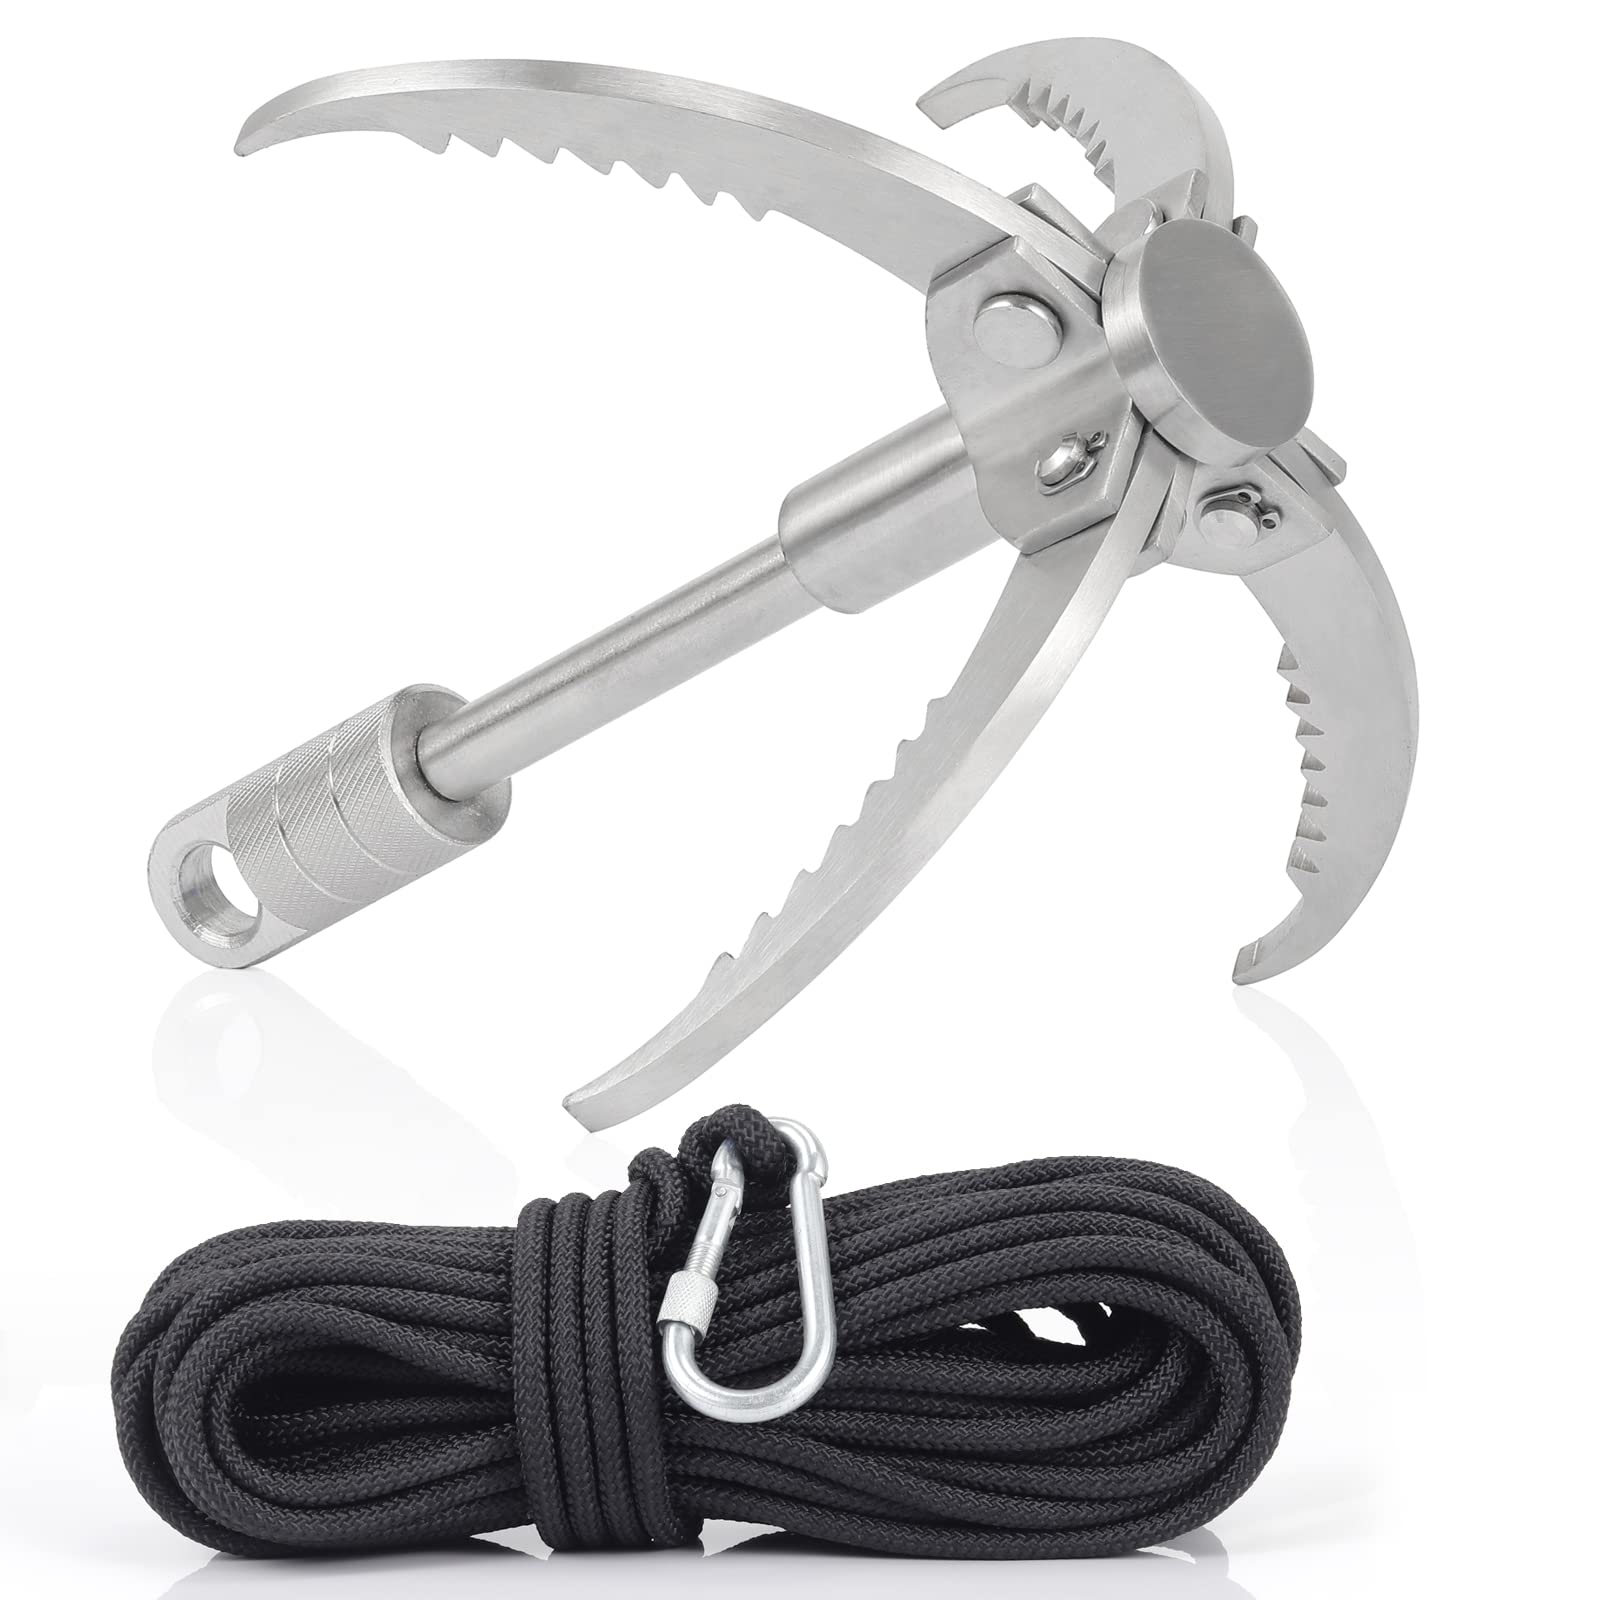  Toddmomy 1 Set Grapple Anchor Hook Multipurpose Tool Gravity  Grappling Hook Grappling Hook Launcher Aquatic Anchor Hook Magnets Fishing  Supplies Stainless Steel Rope Dart Claw : Sports & Outdoors